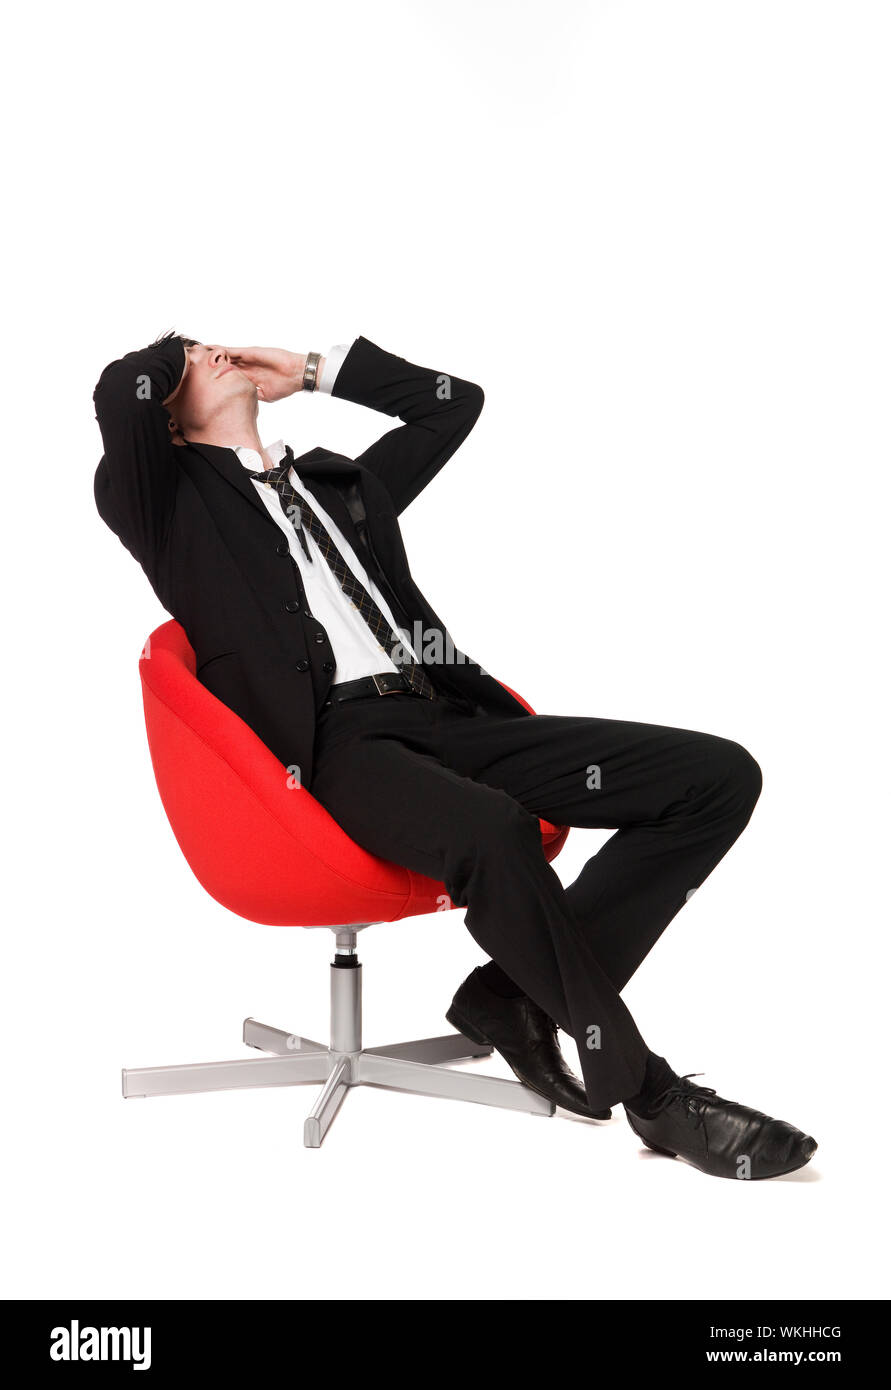 Man in red armchair Stock Photo